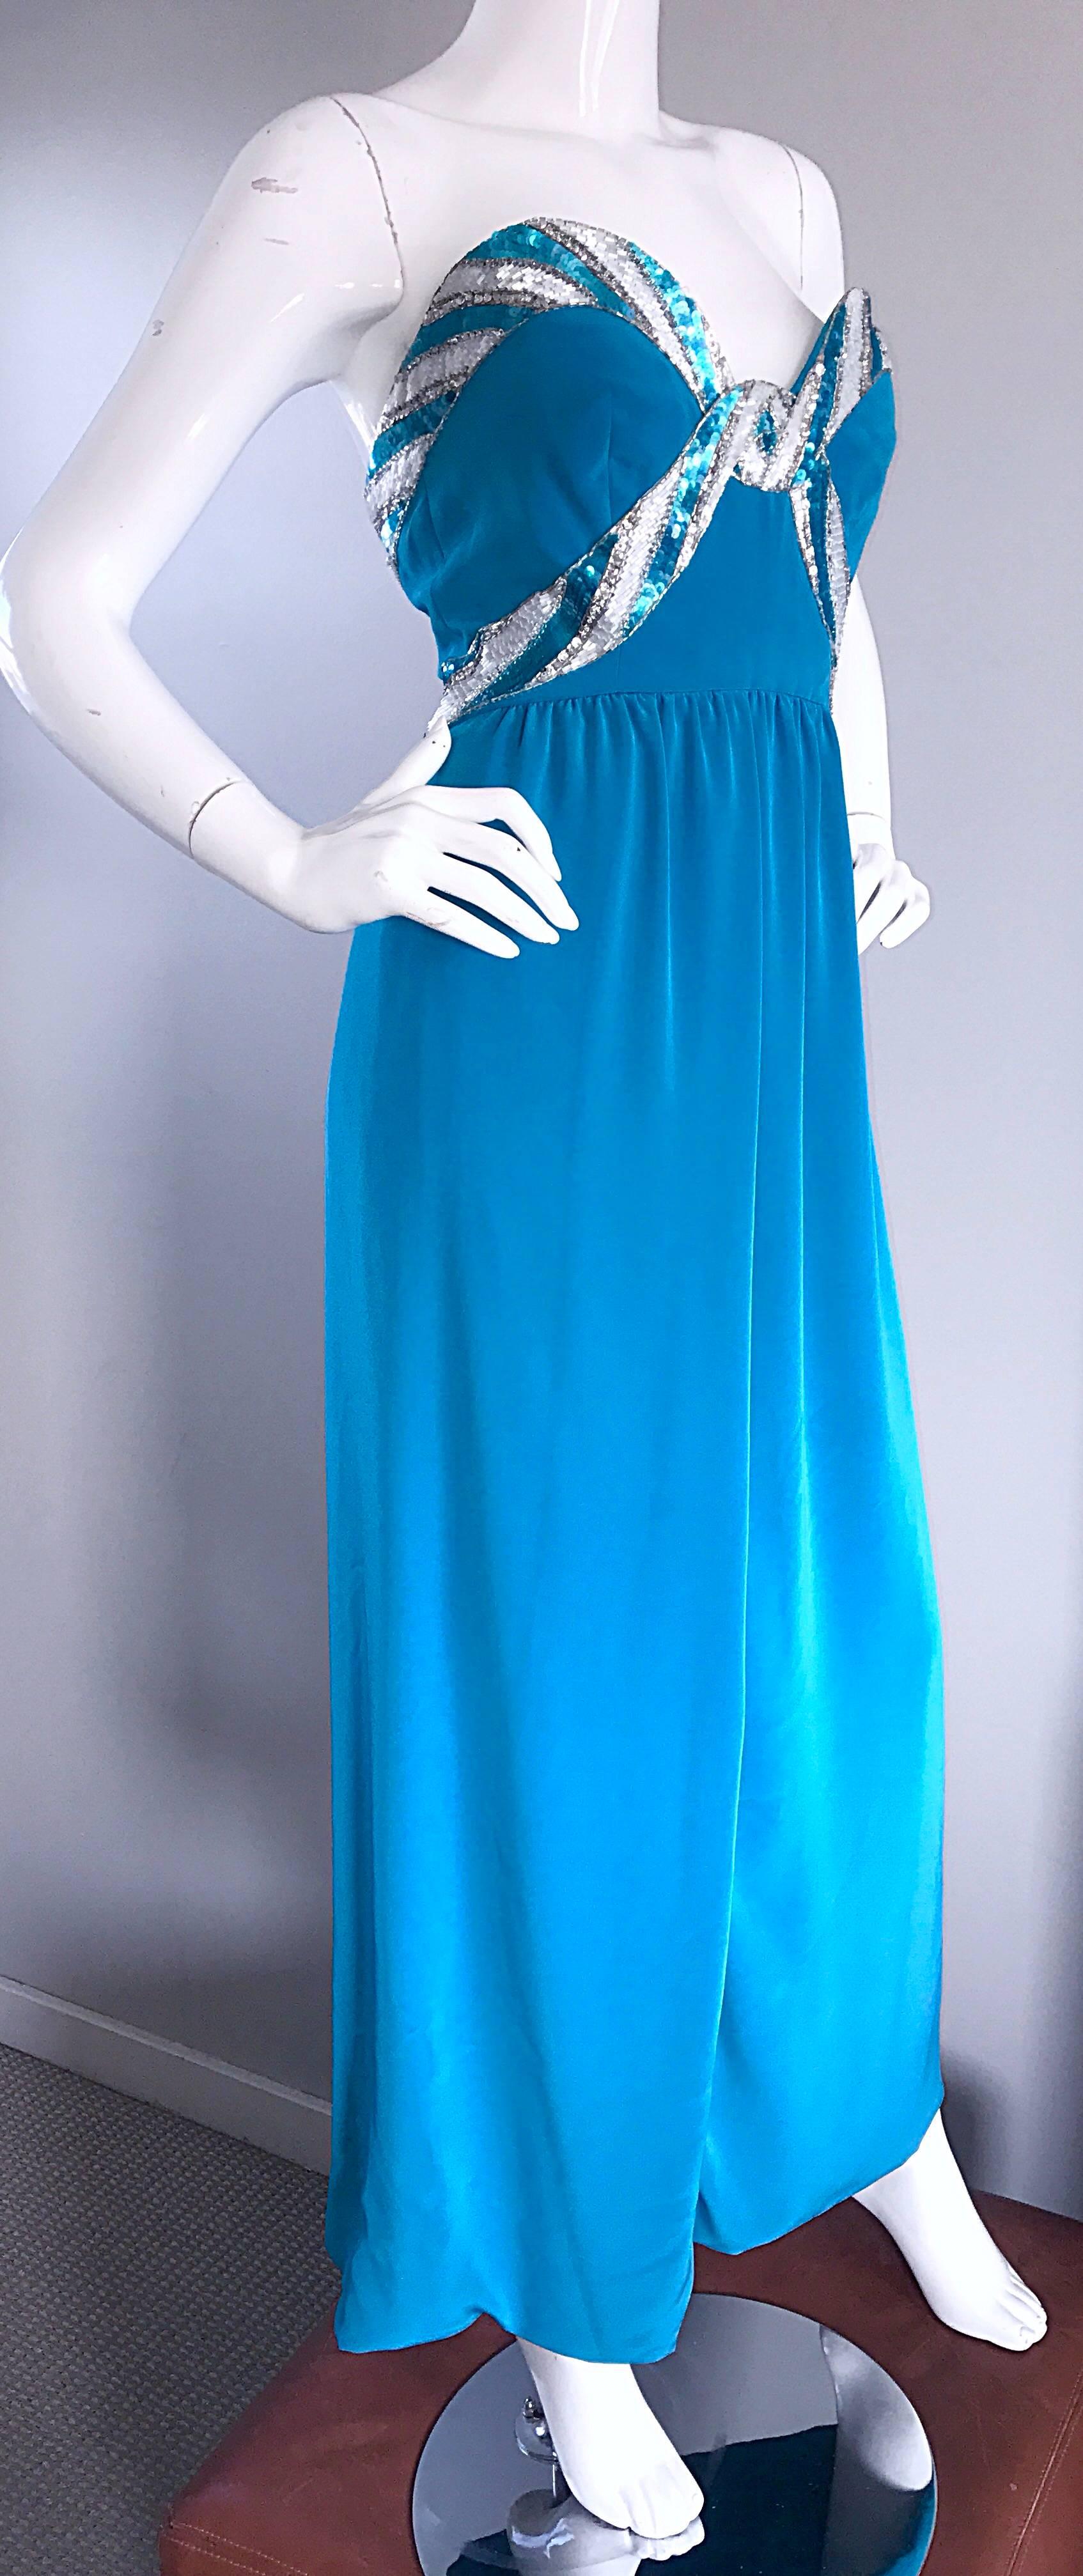 Women's Bob Mackie Vintage Turquoise Teal Blue Sequin Sz 4 Strapless Gown Evening Dress For Sale